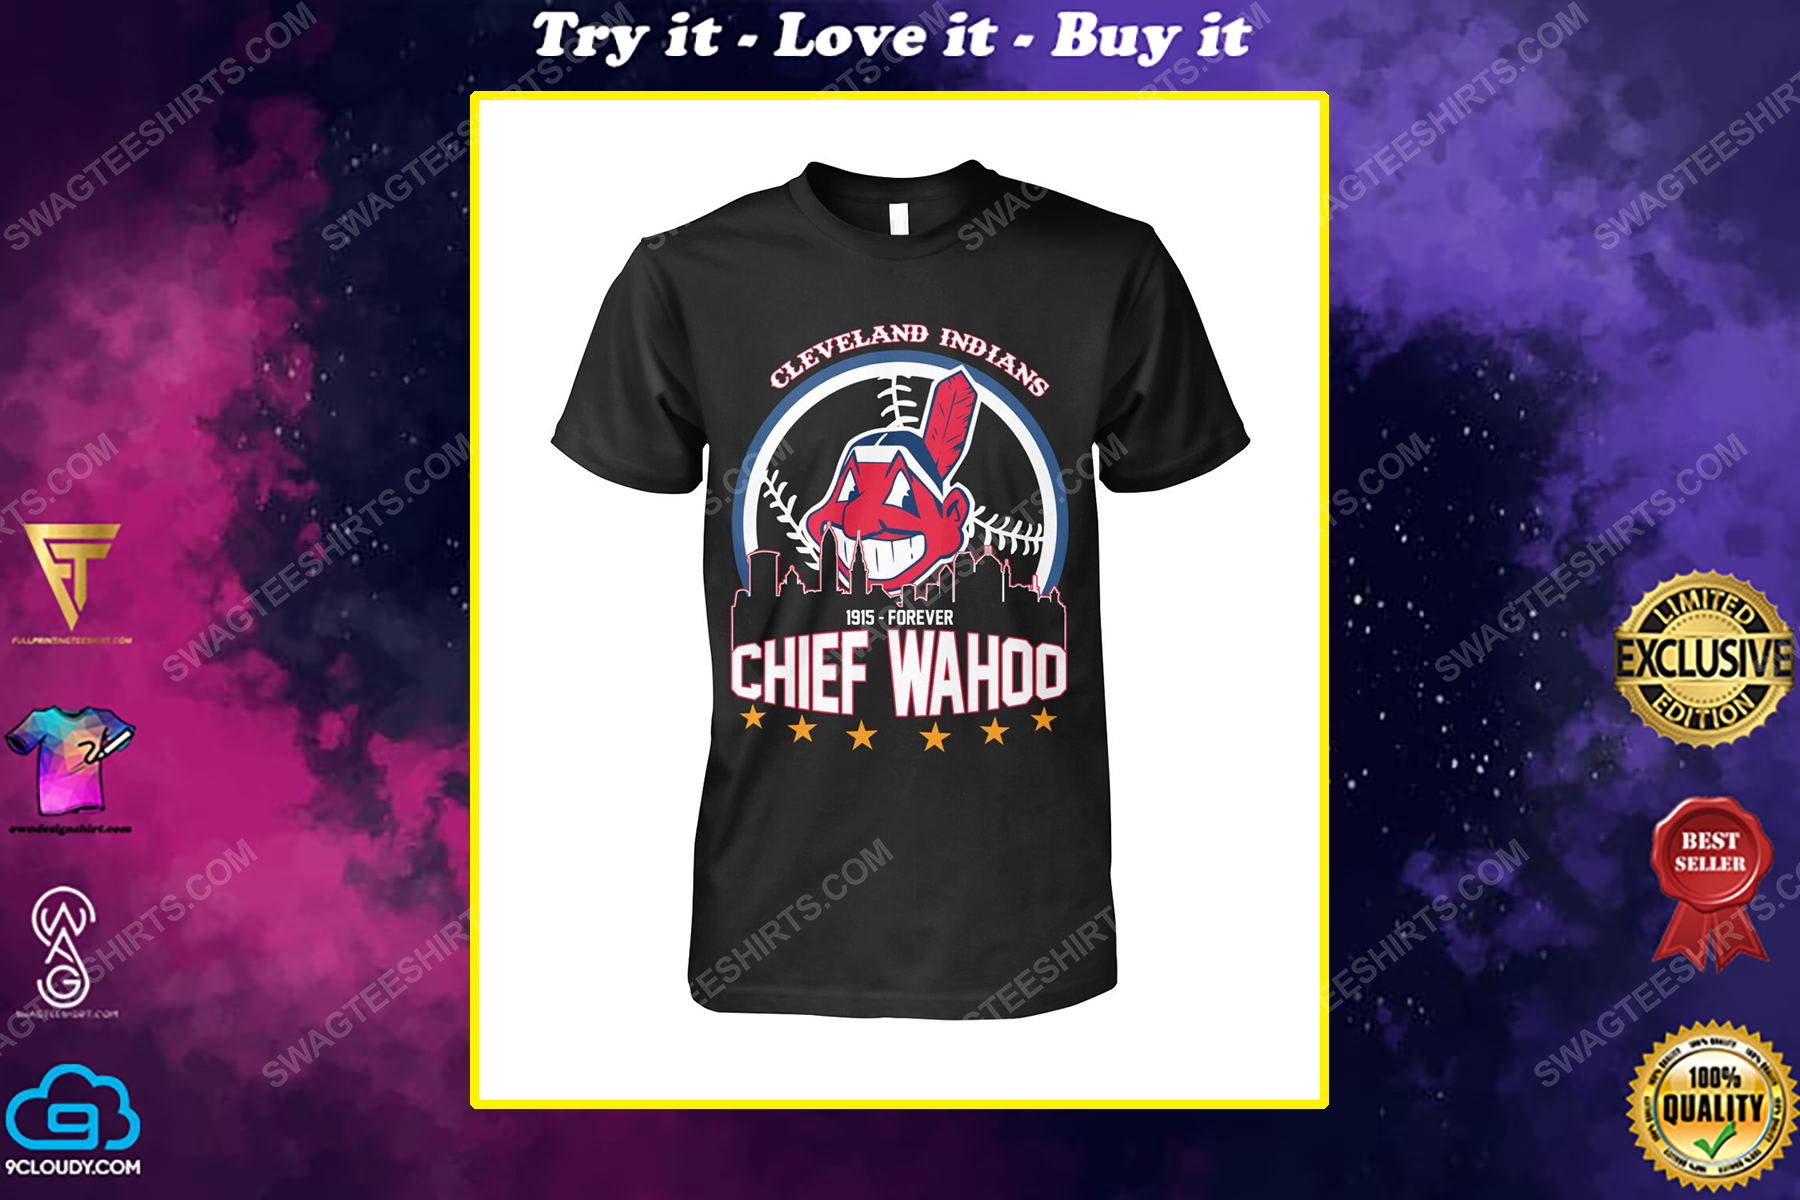 The cleveland indians 1915 forever chief wahoo shirt